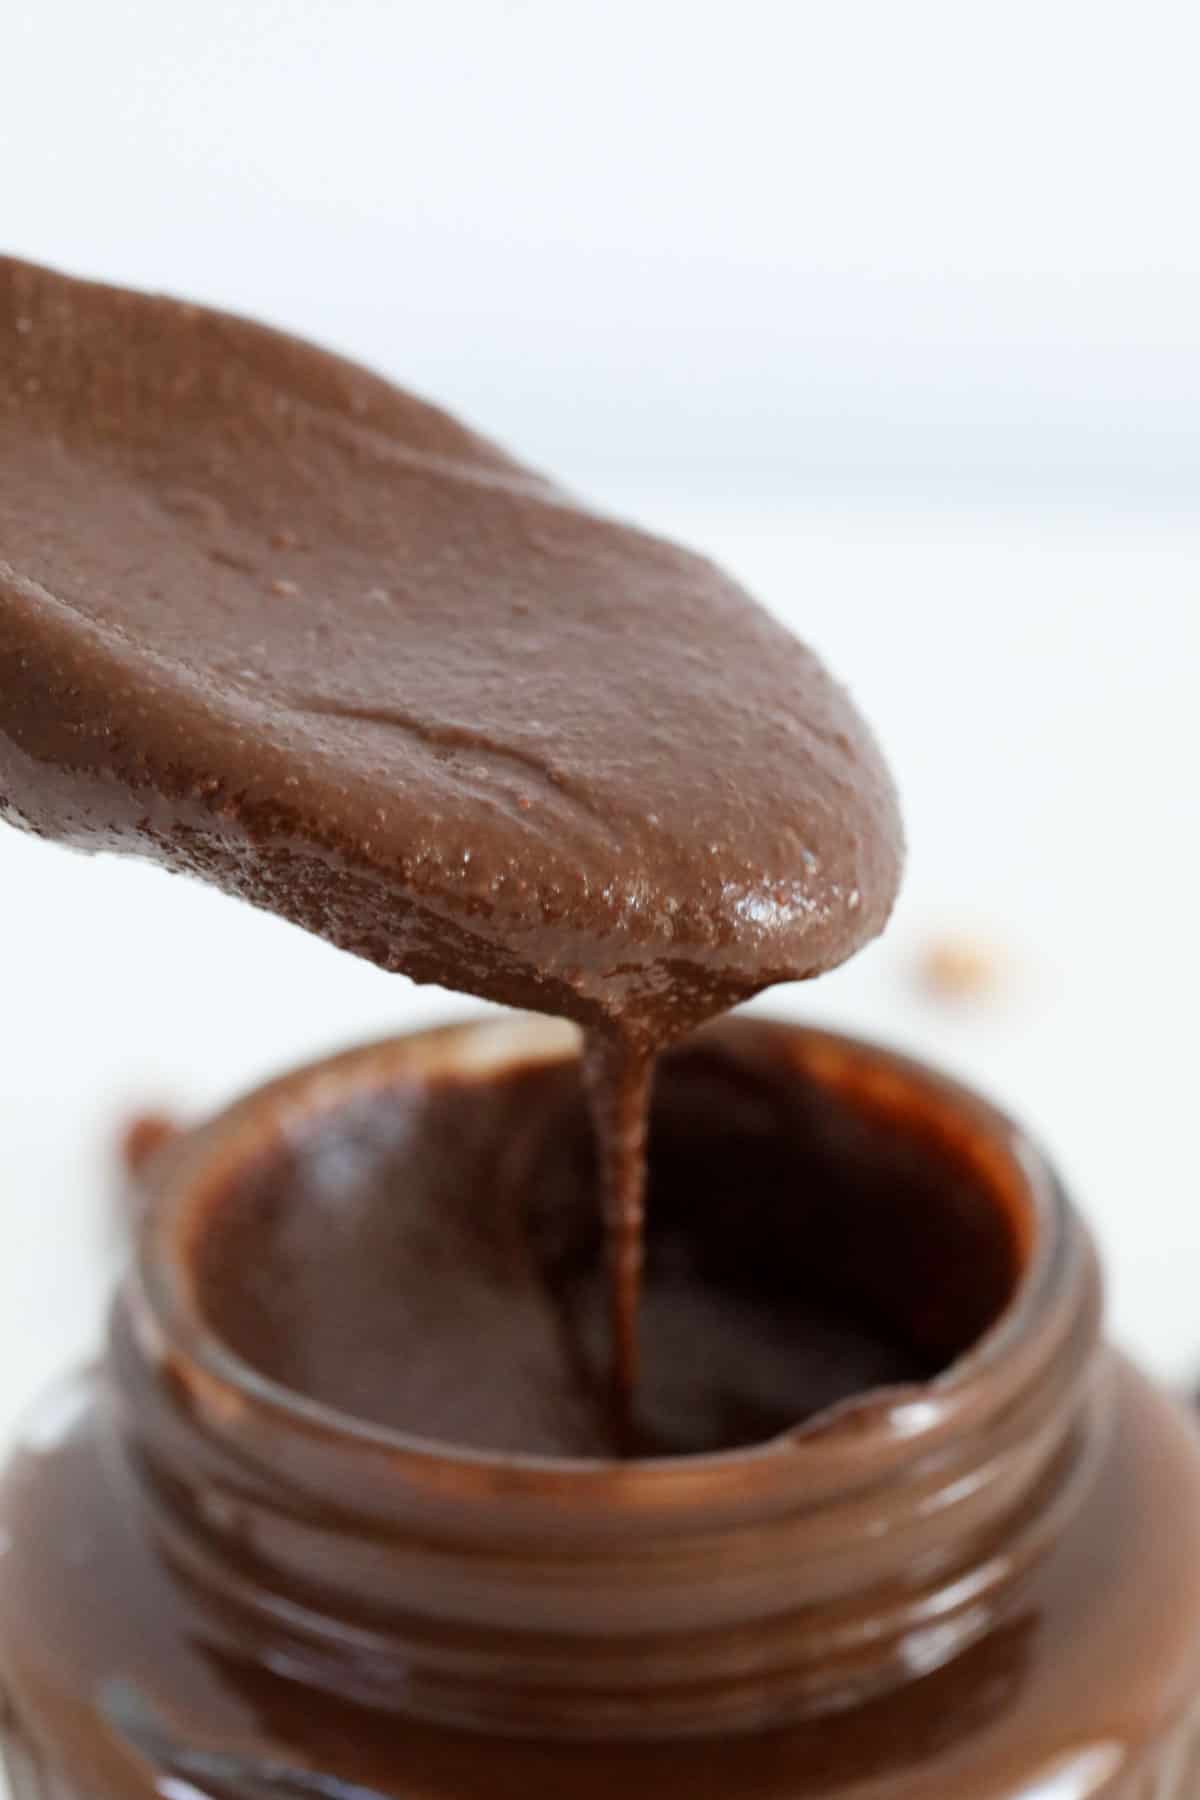 Smooth homemade Nutella dripping from a spoon held above a jar.